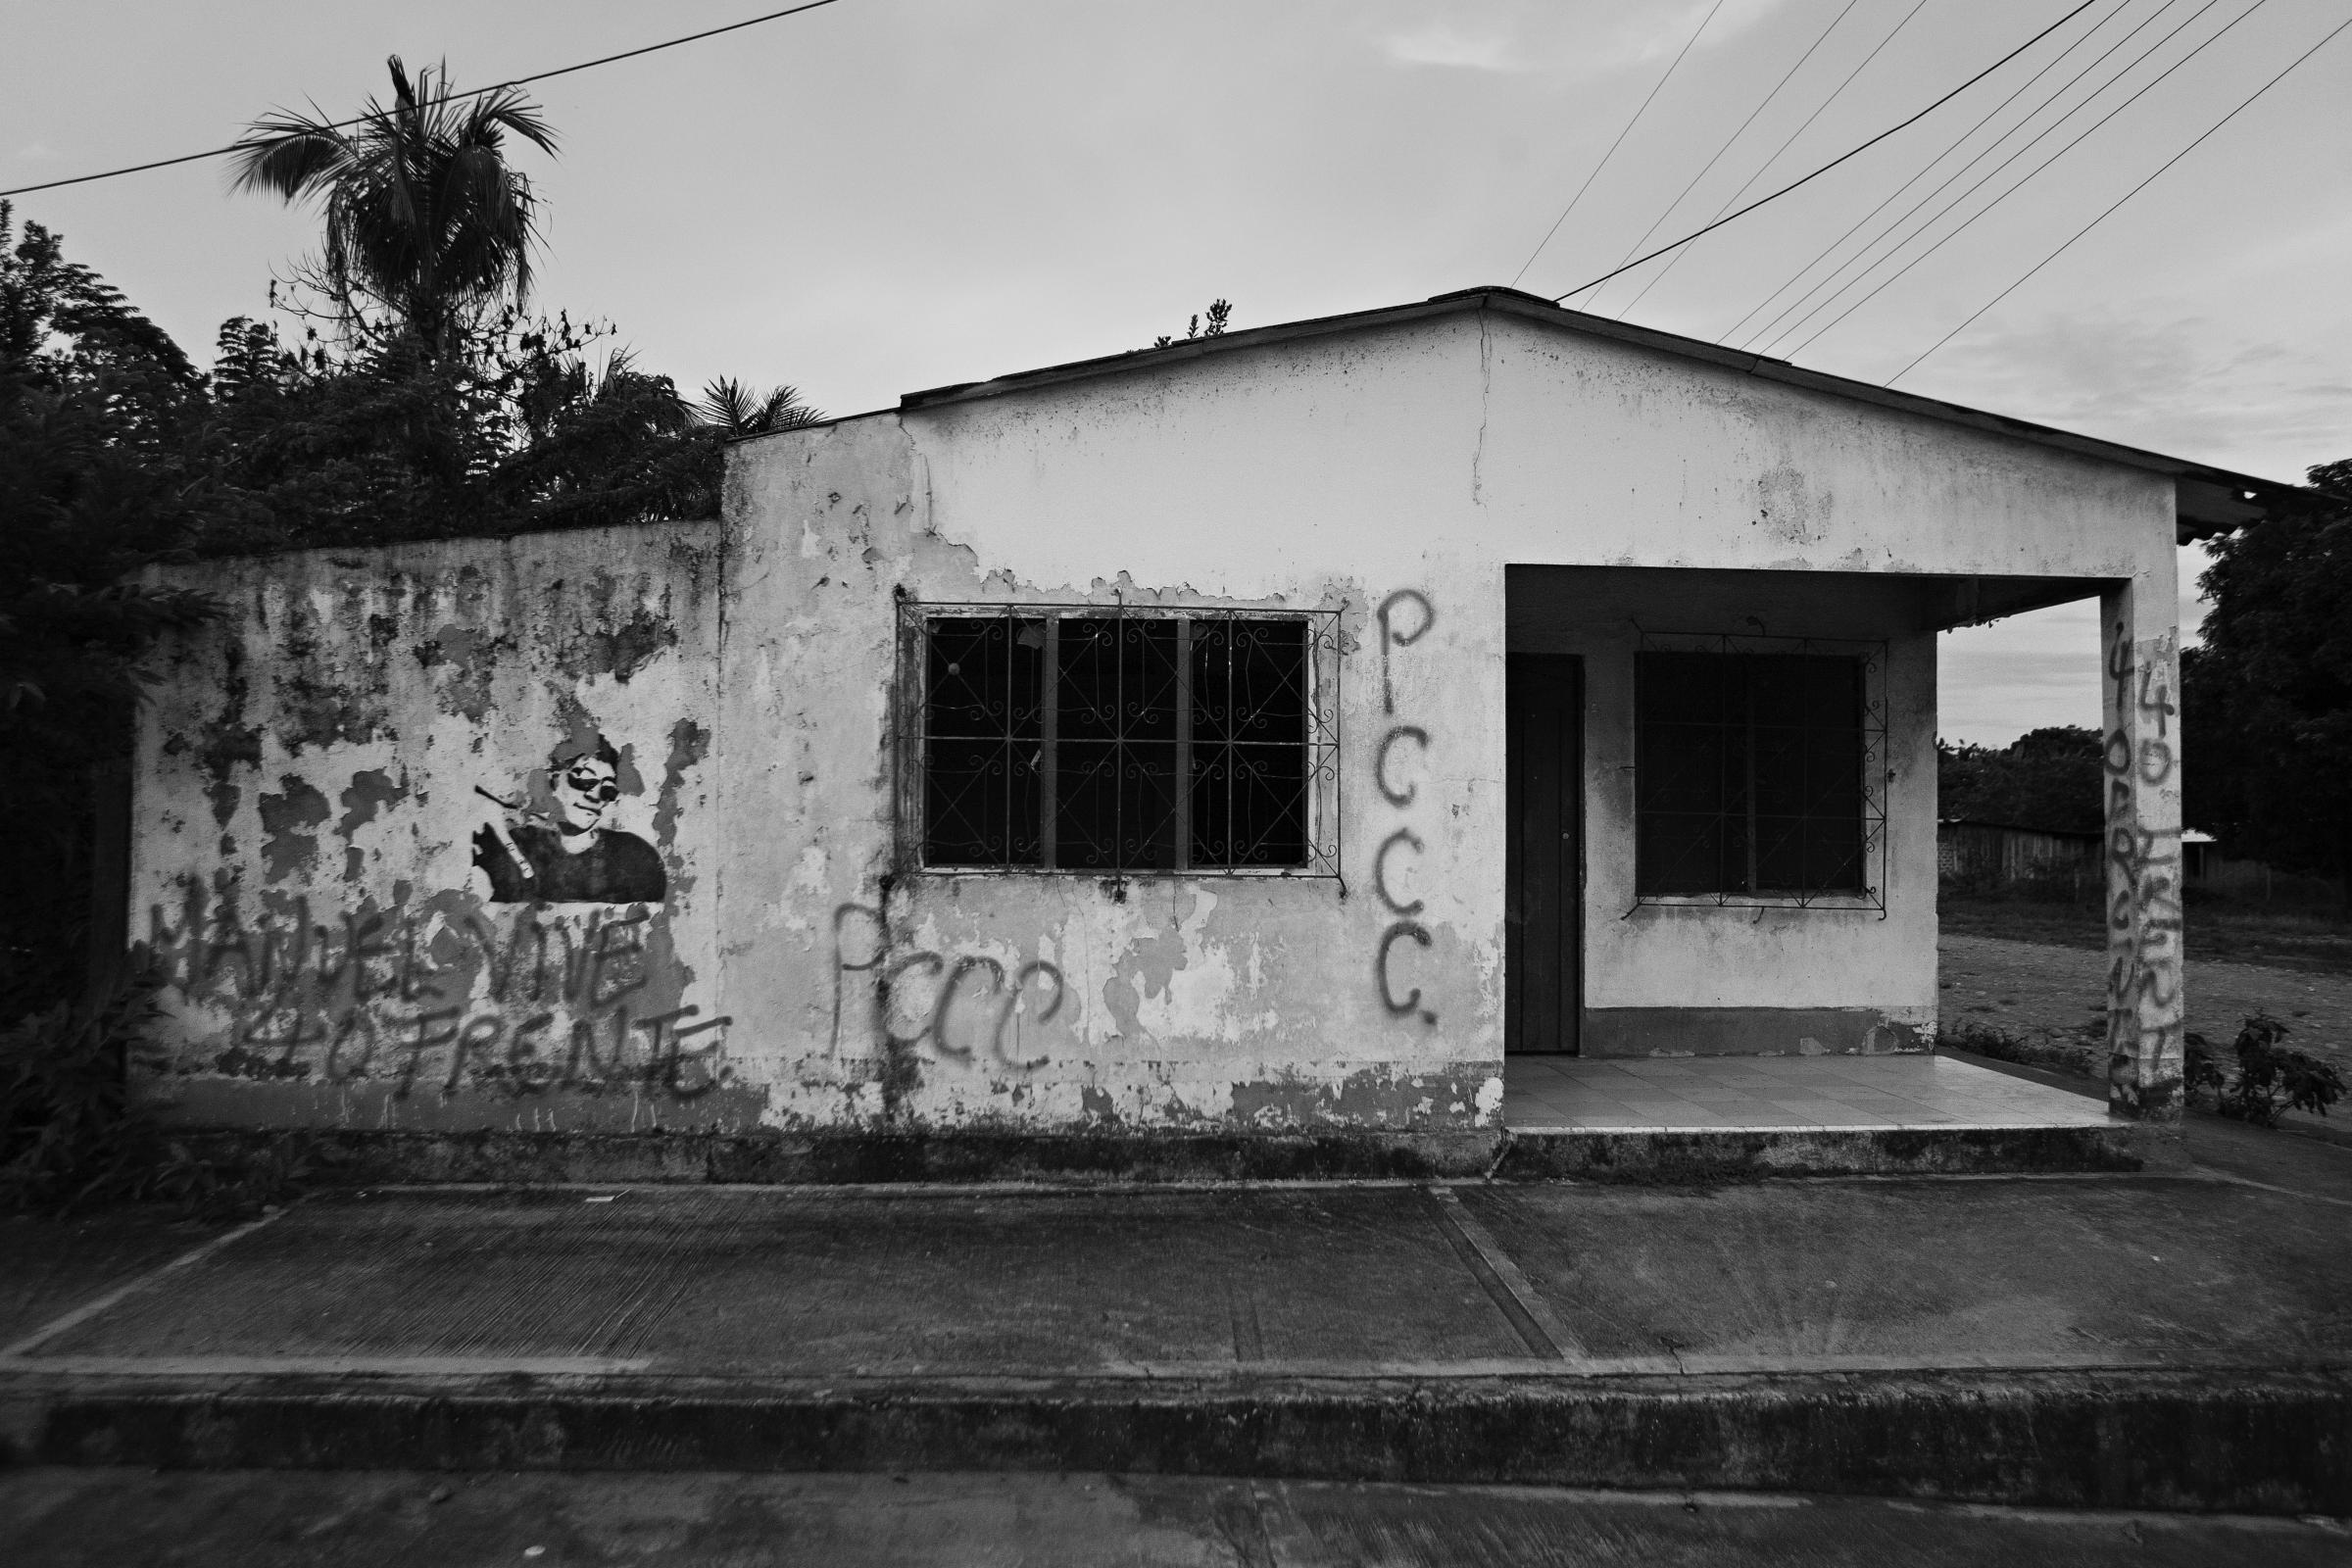 50 years of FARC - Messages alluding to the FARC-EP guerrilla in the town of...